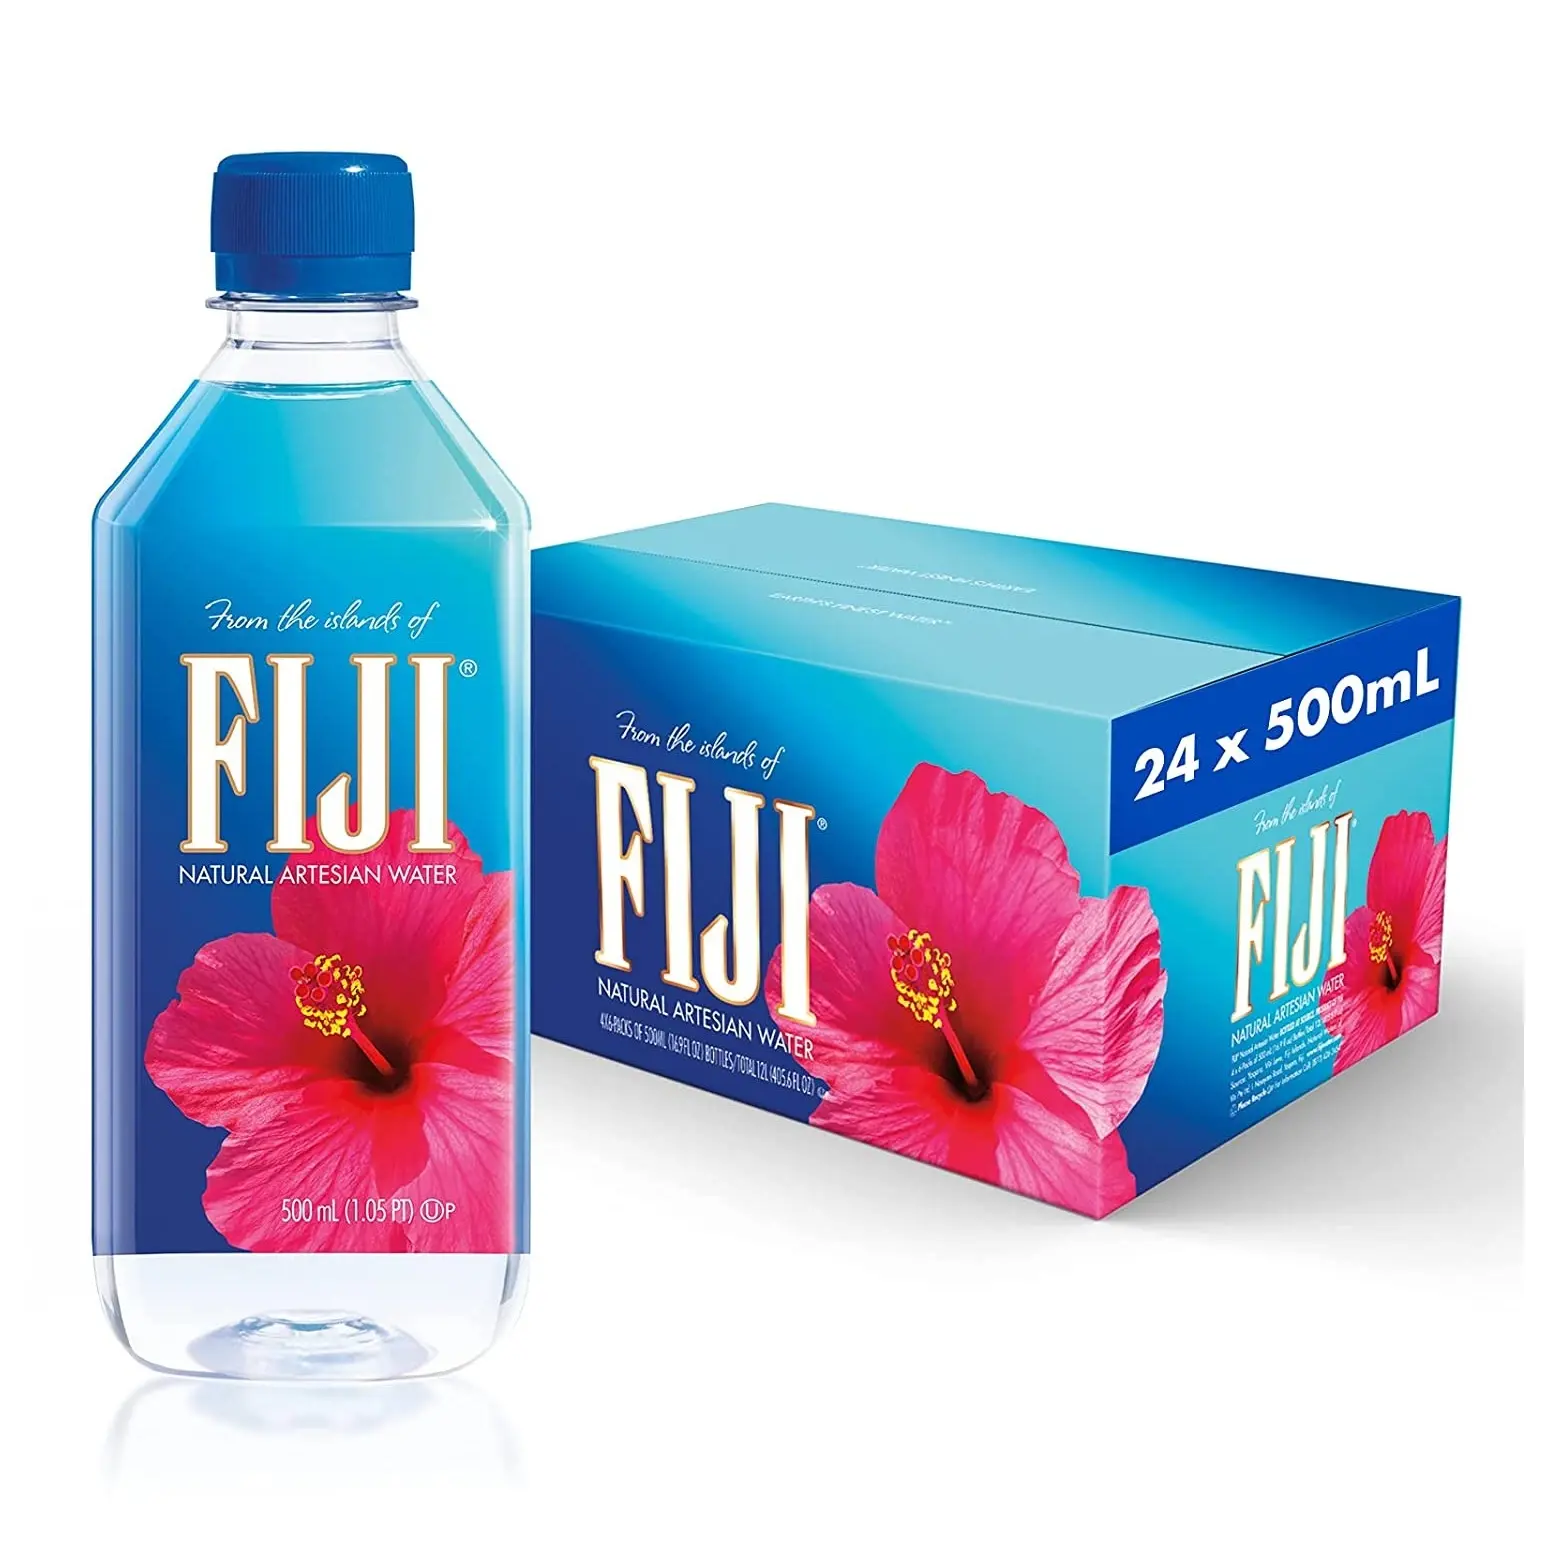 High Quality FIJI Natural Artesian Water 330ml, 500ml, 1L, 1.5L Bottles Available For Sale At Low Price